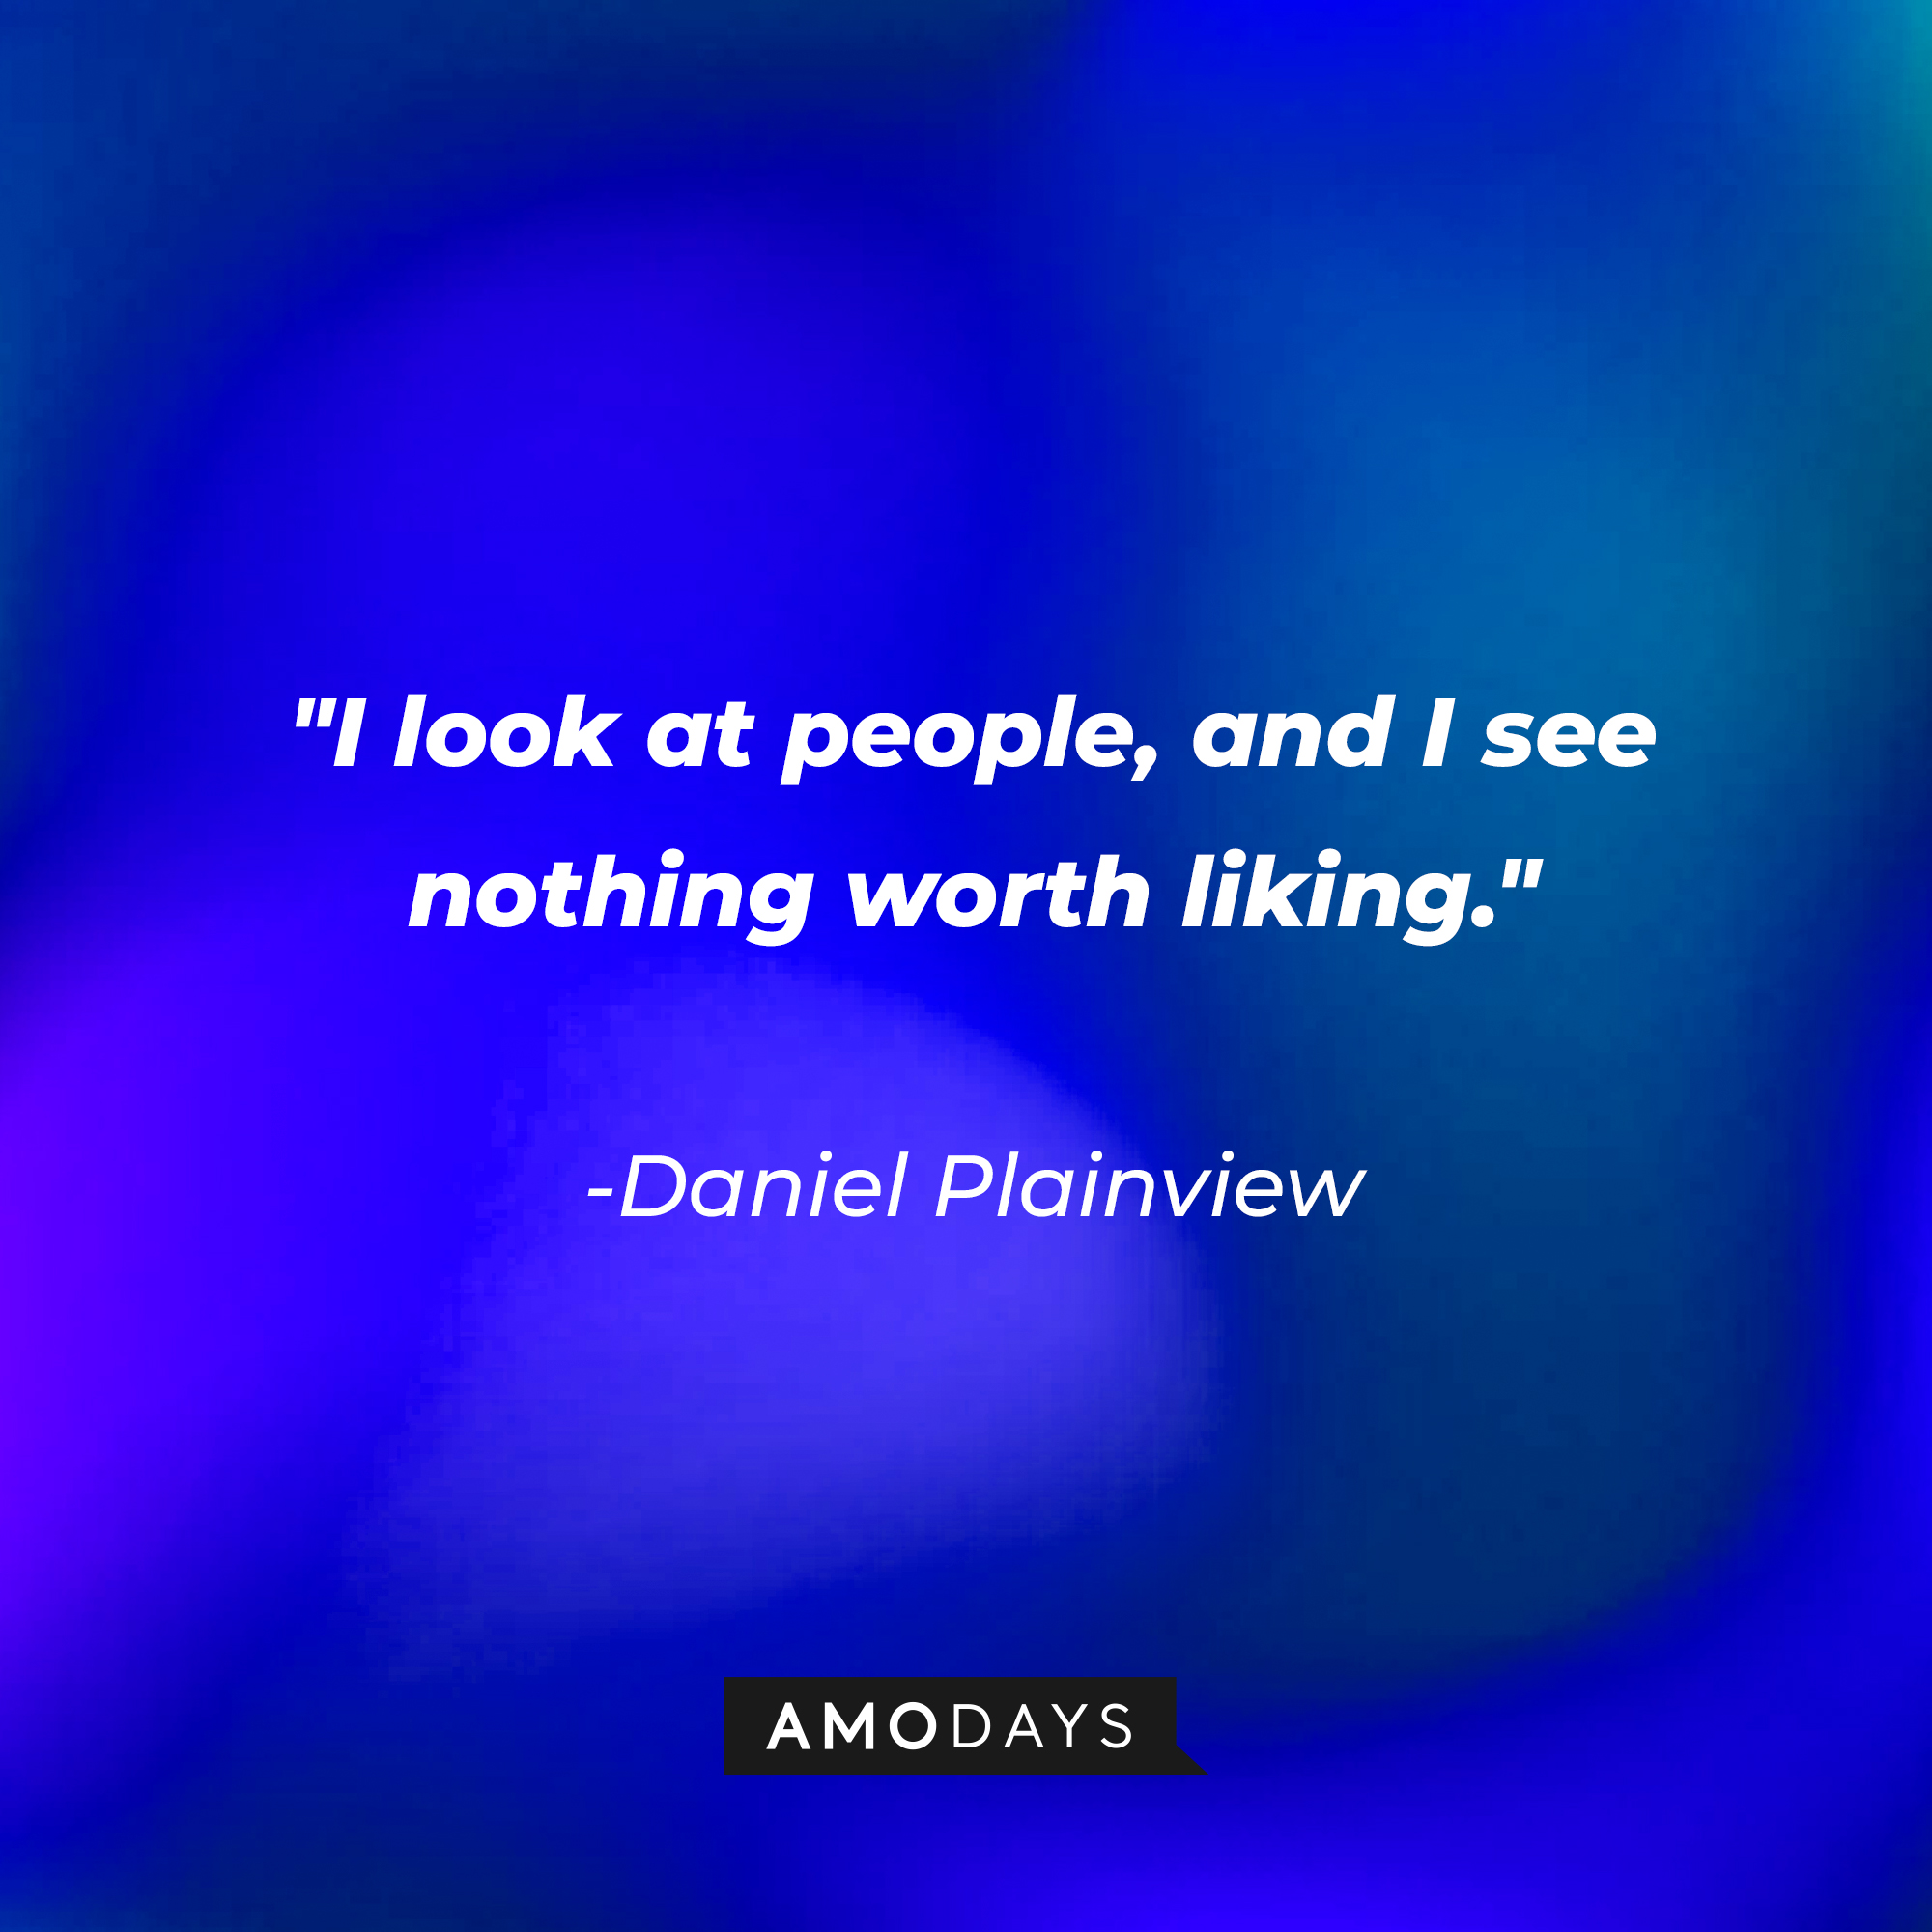 Daniel Plainview’s quote:  “I look at people, and I see nothing worth liking.” | Source: AmoDays